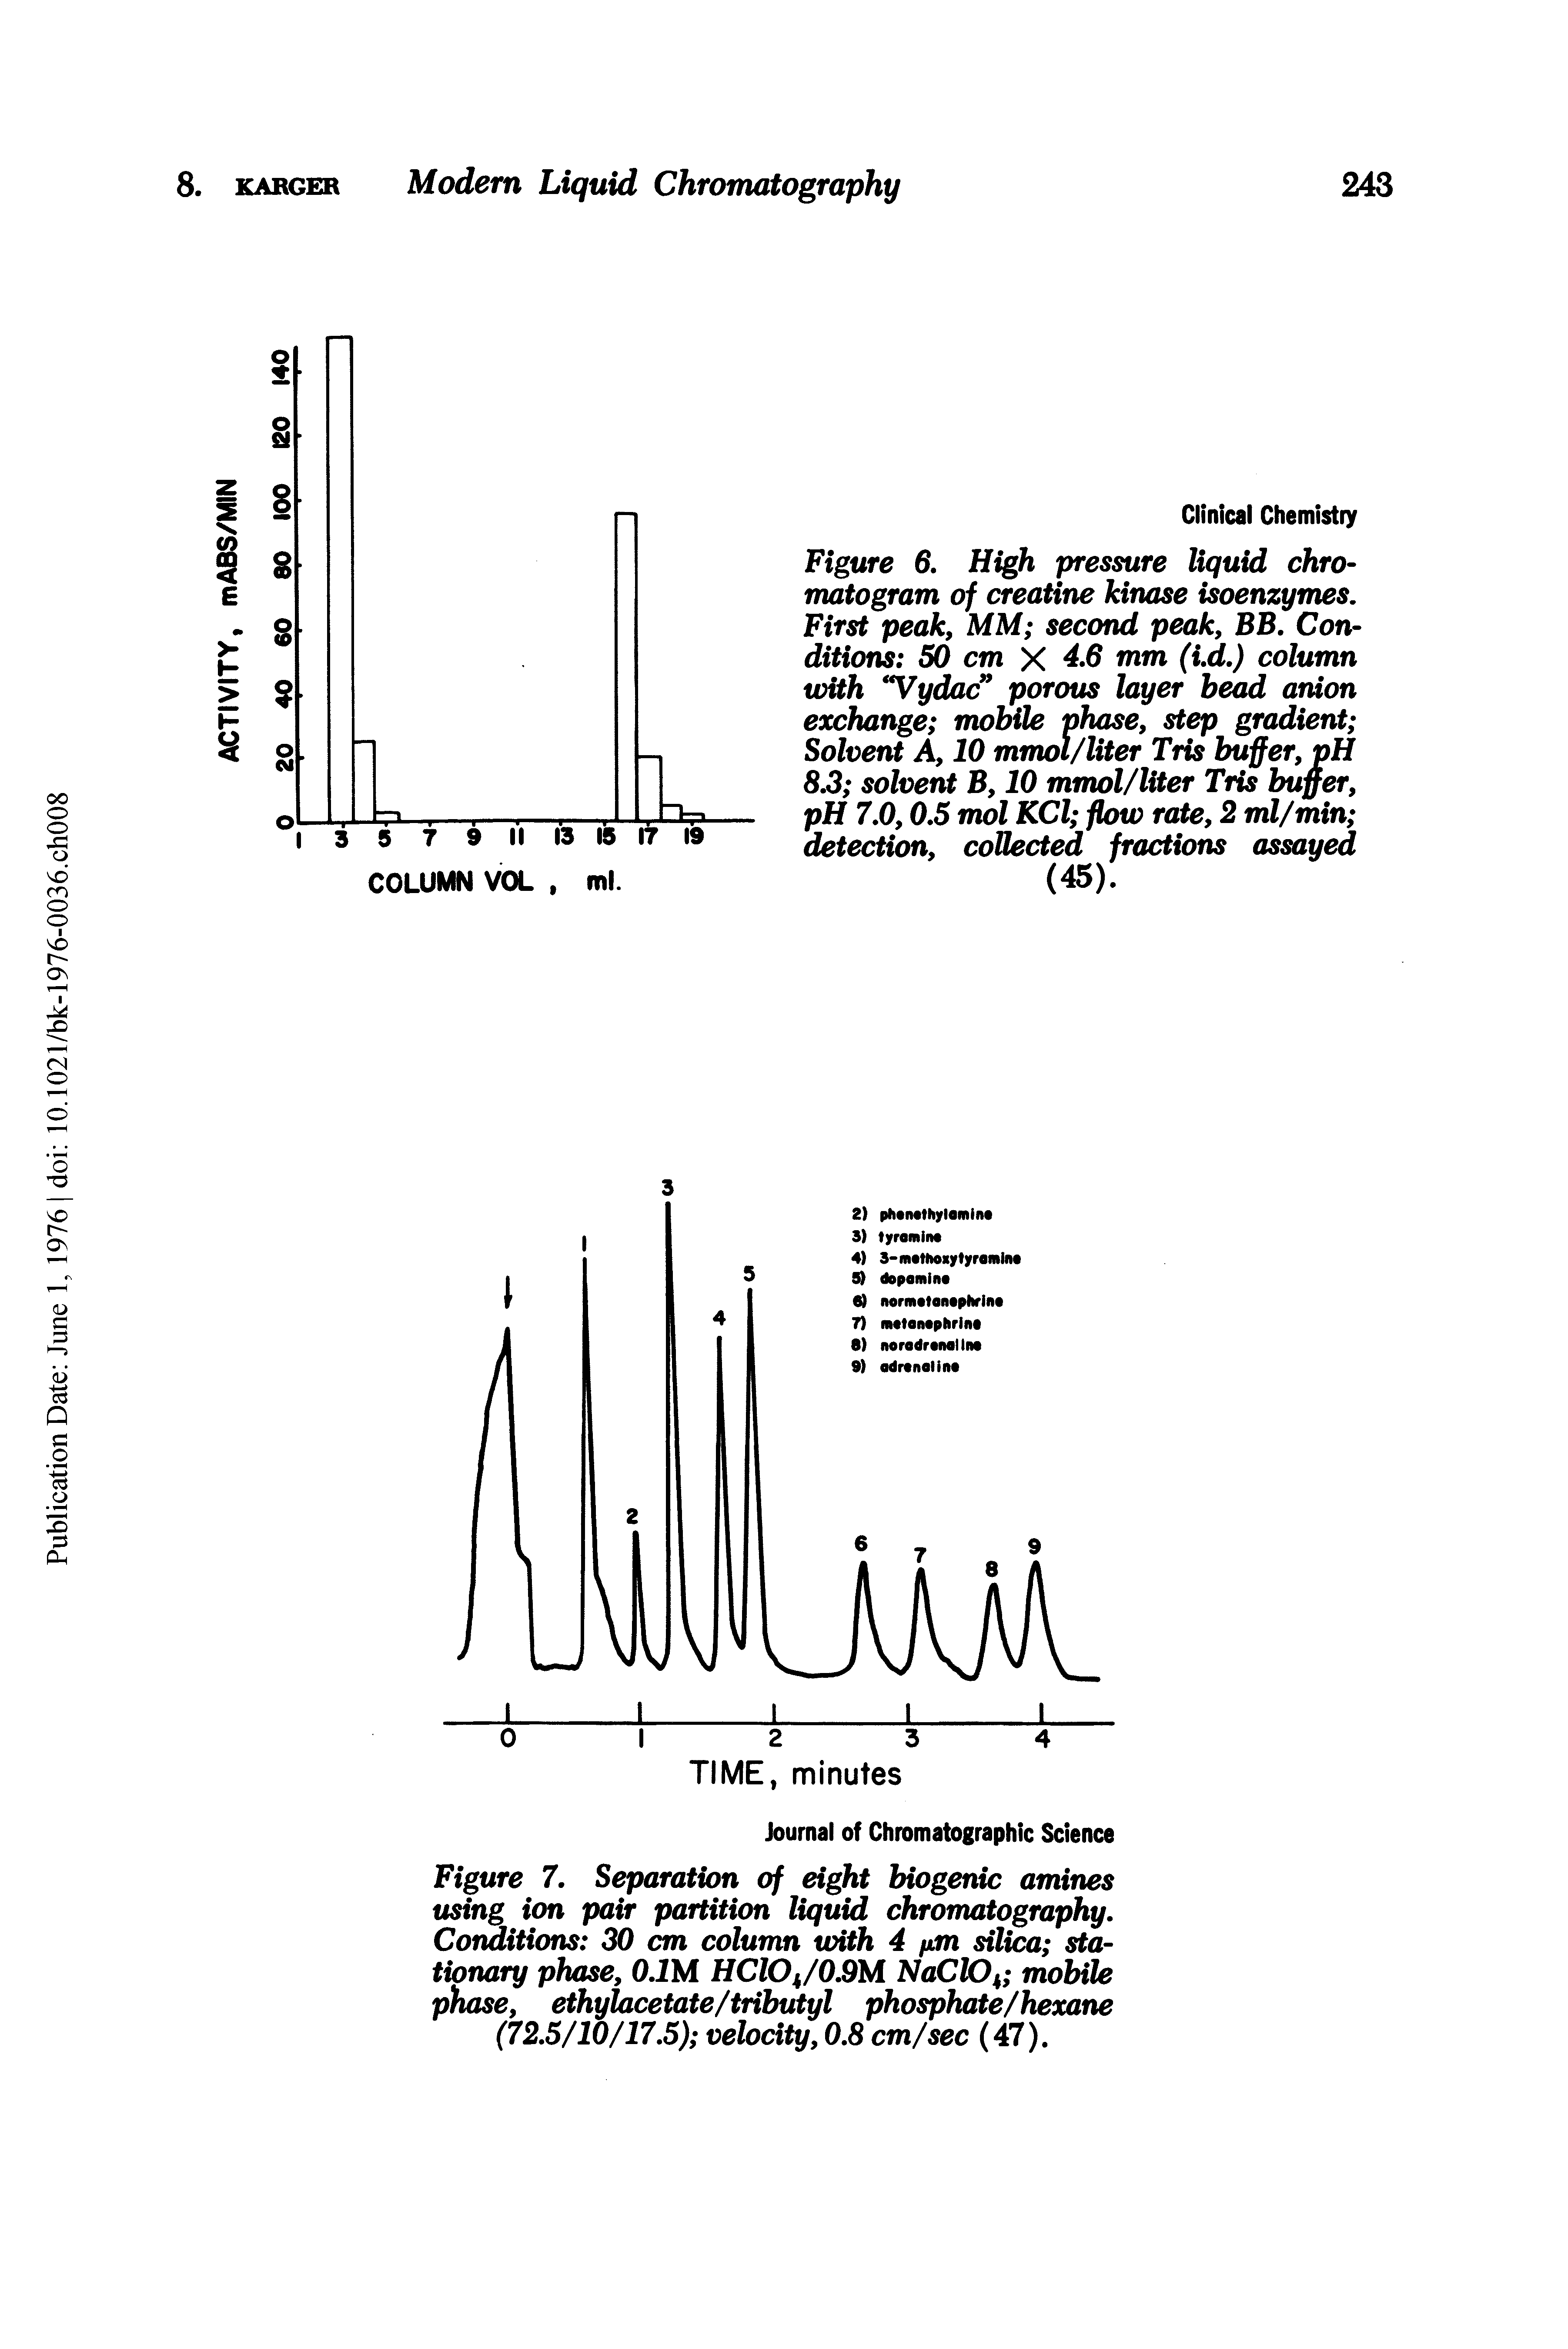 Figure 7. Separation of eight biogenic amines using ion pair partition liquid chromatography. Conditions 30 cm column with 4 fim silica stationary phase, 0.1M HClO /0.9M NaClO mobile phase, ethylacetate/tributyl phosphate/hexane (72.5/10/17.5) velocity, 0.8 cm/sec (47).